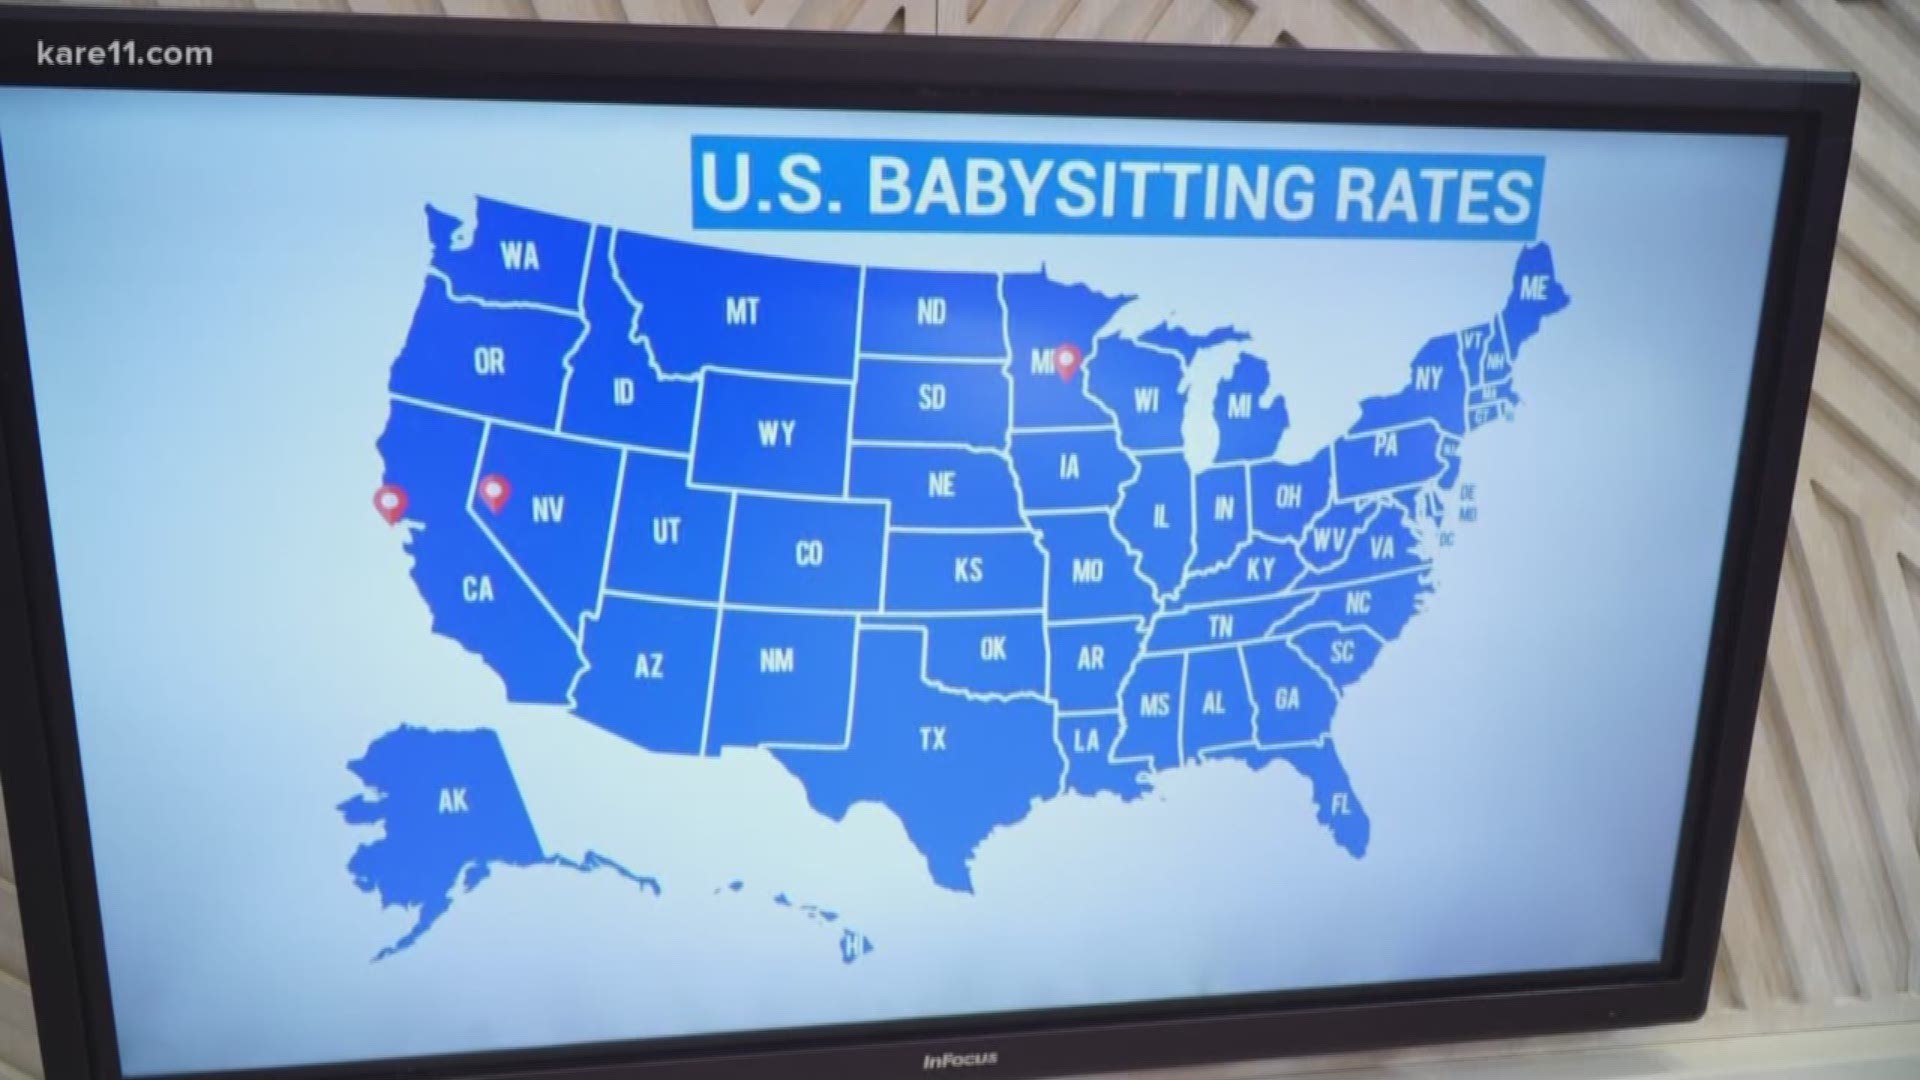 The study from UrbanSitter says that the Minneapolis babysitting rates are significantly lower than the national average. https://kare11.tv/2TWAOiJ